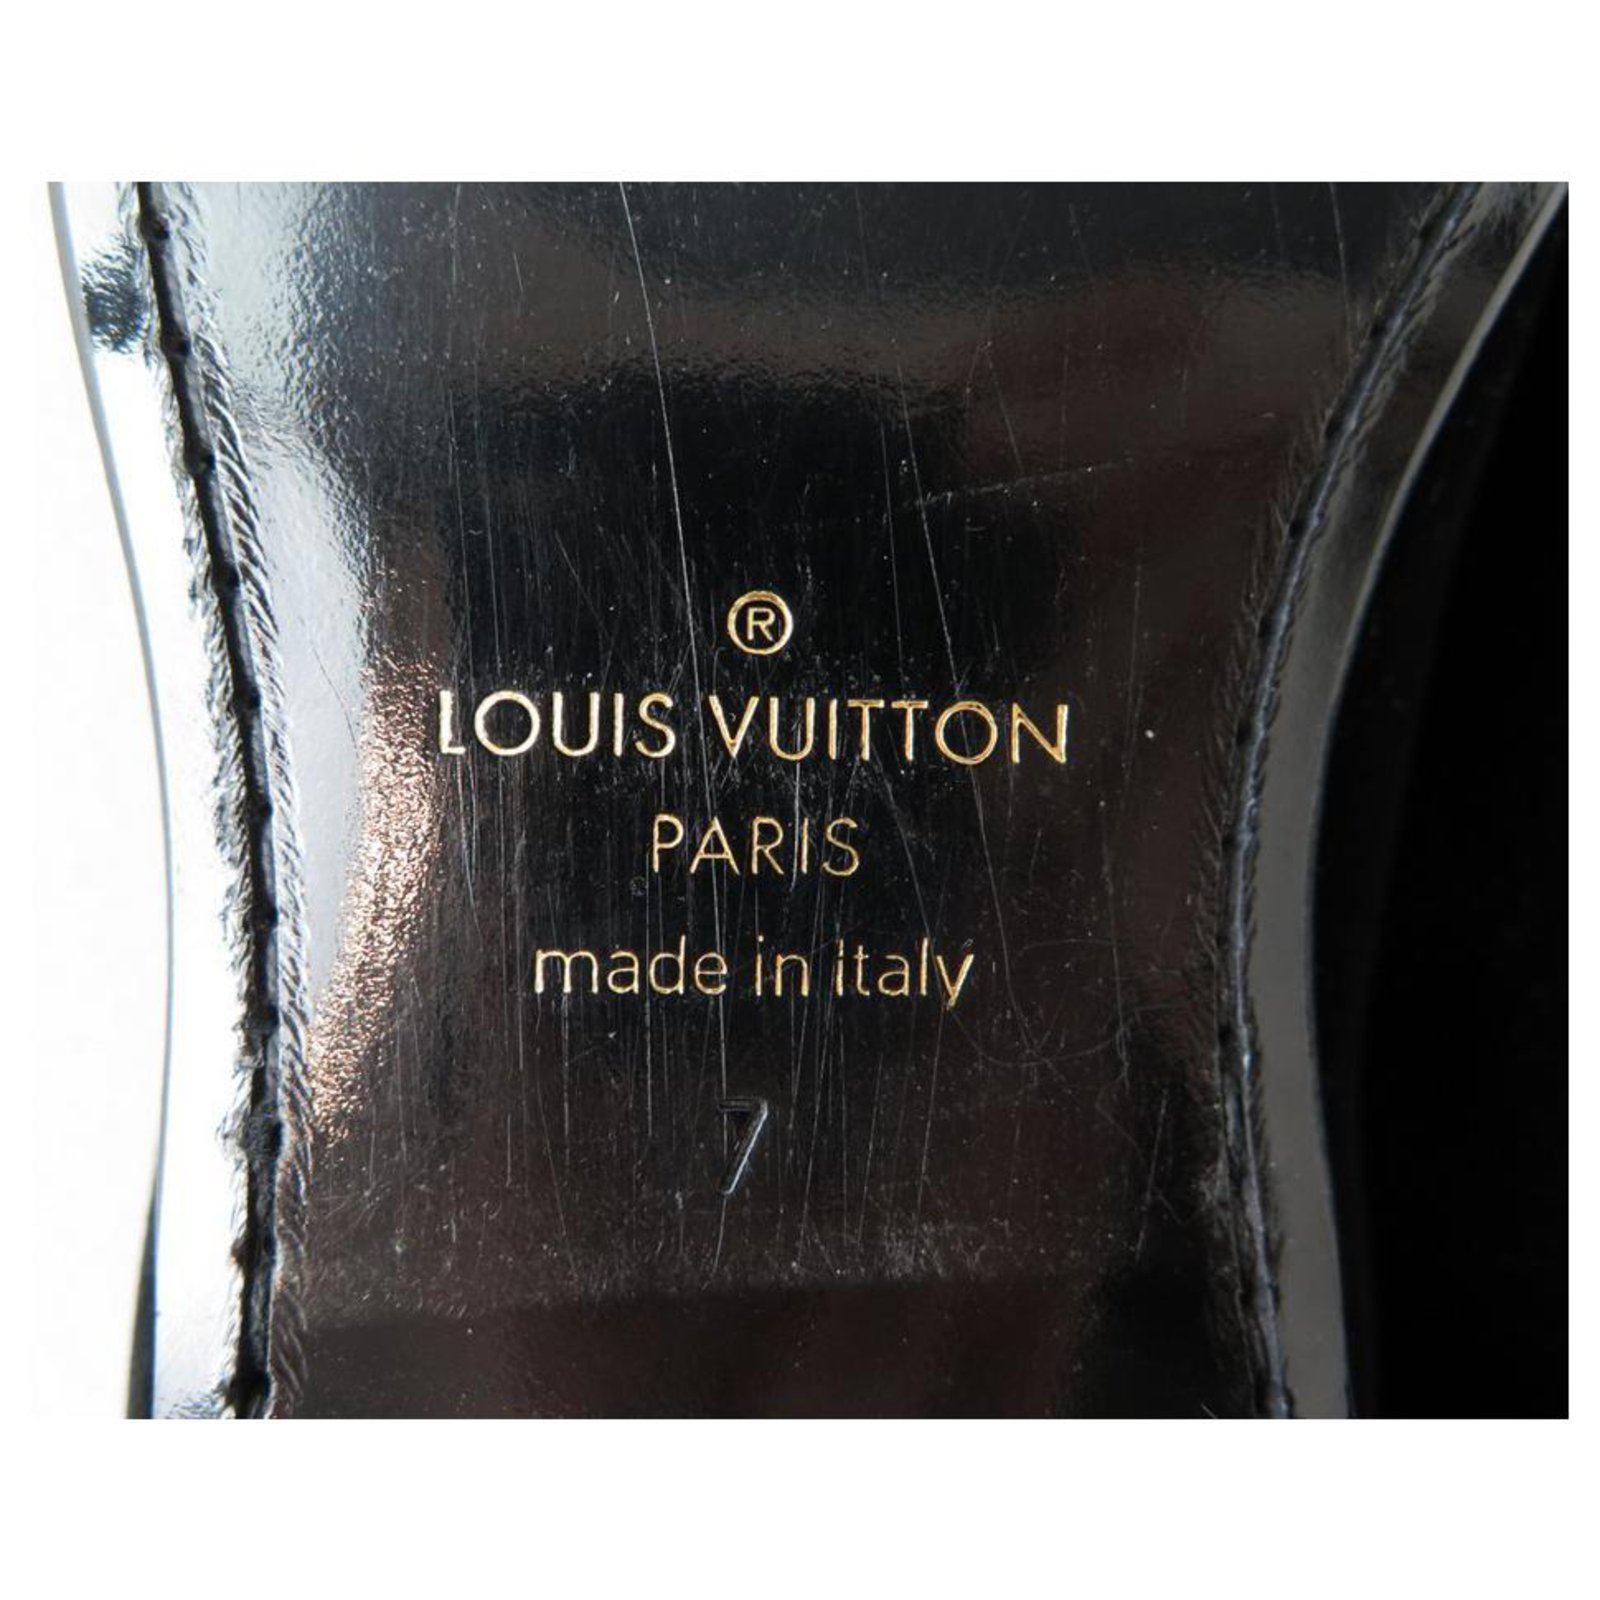 Louis Vuitton Monogram Pattern Slippers - Black Loafers, Shoes - LOU795039